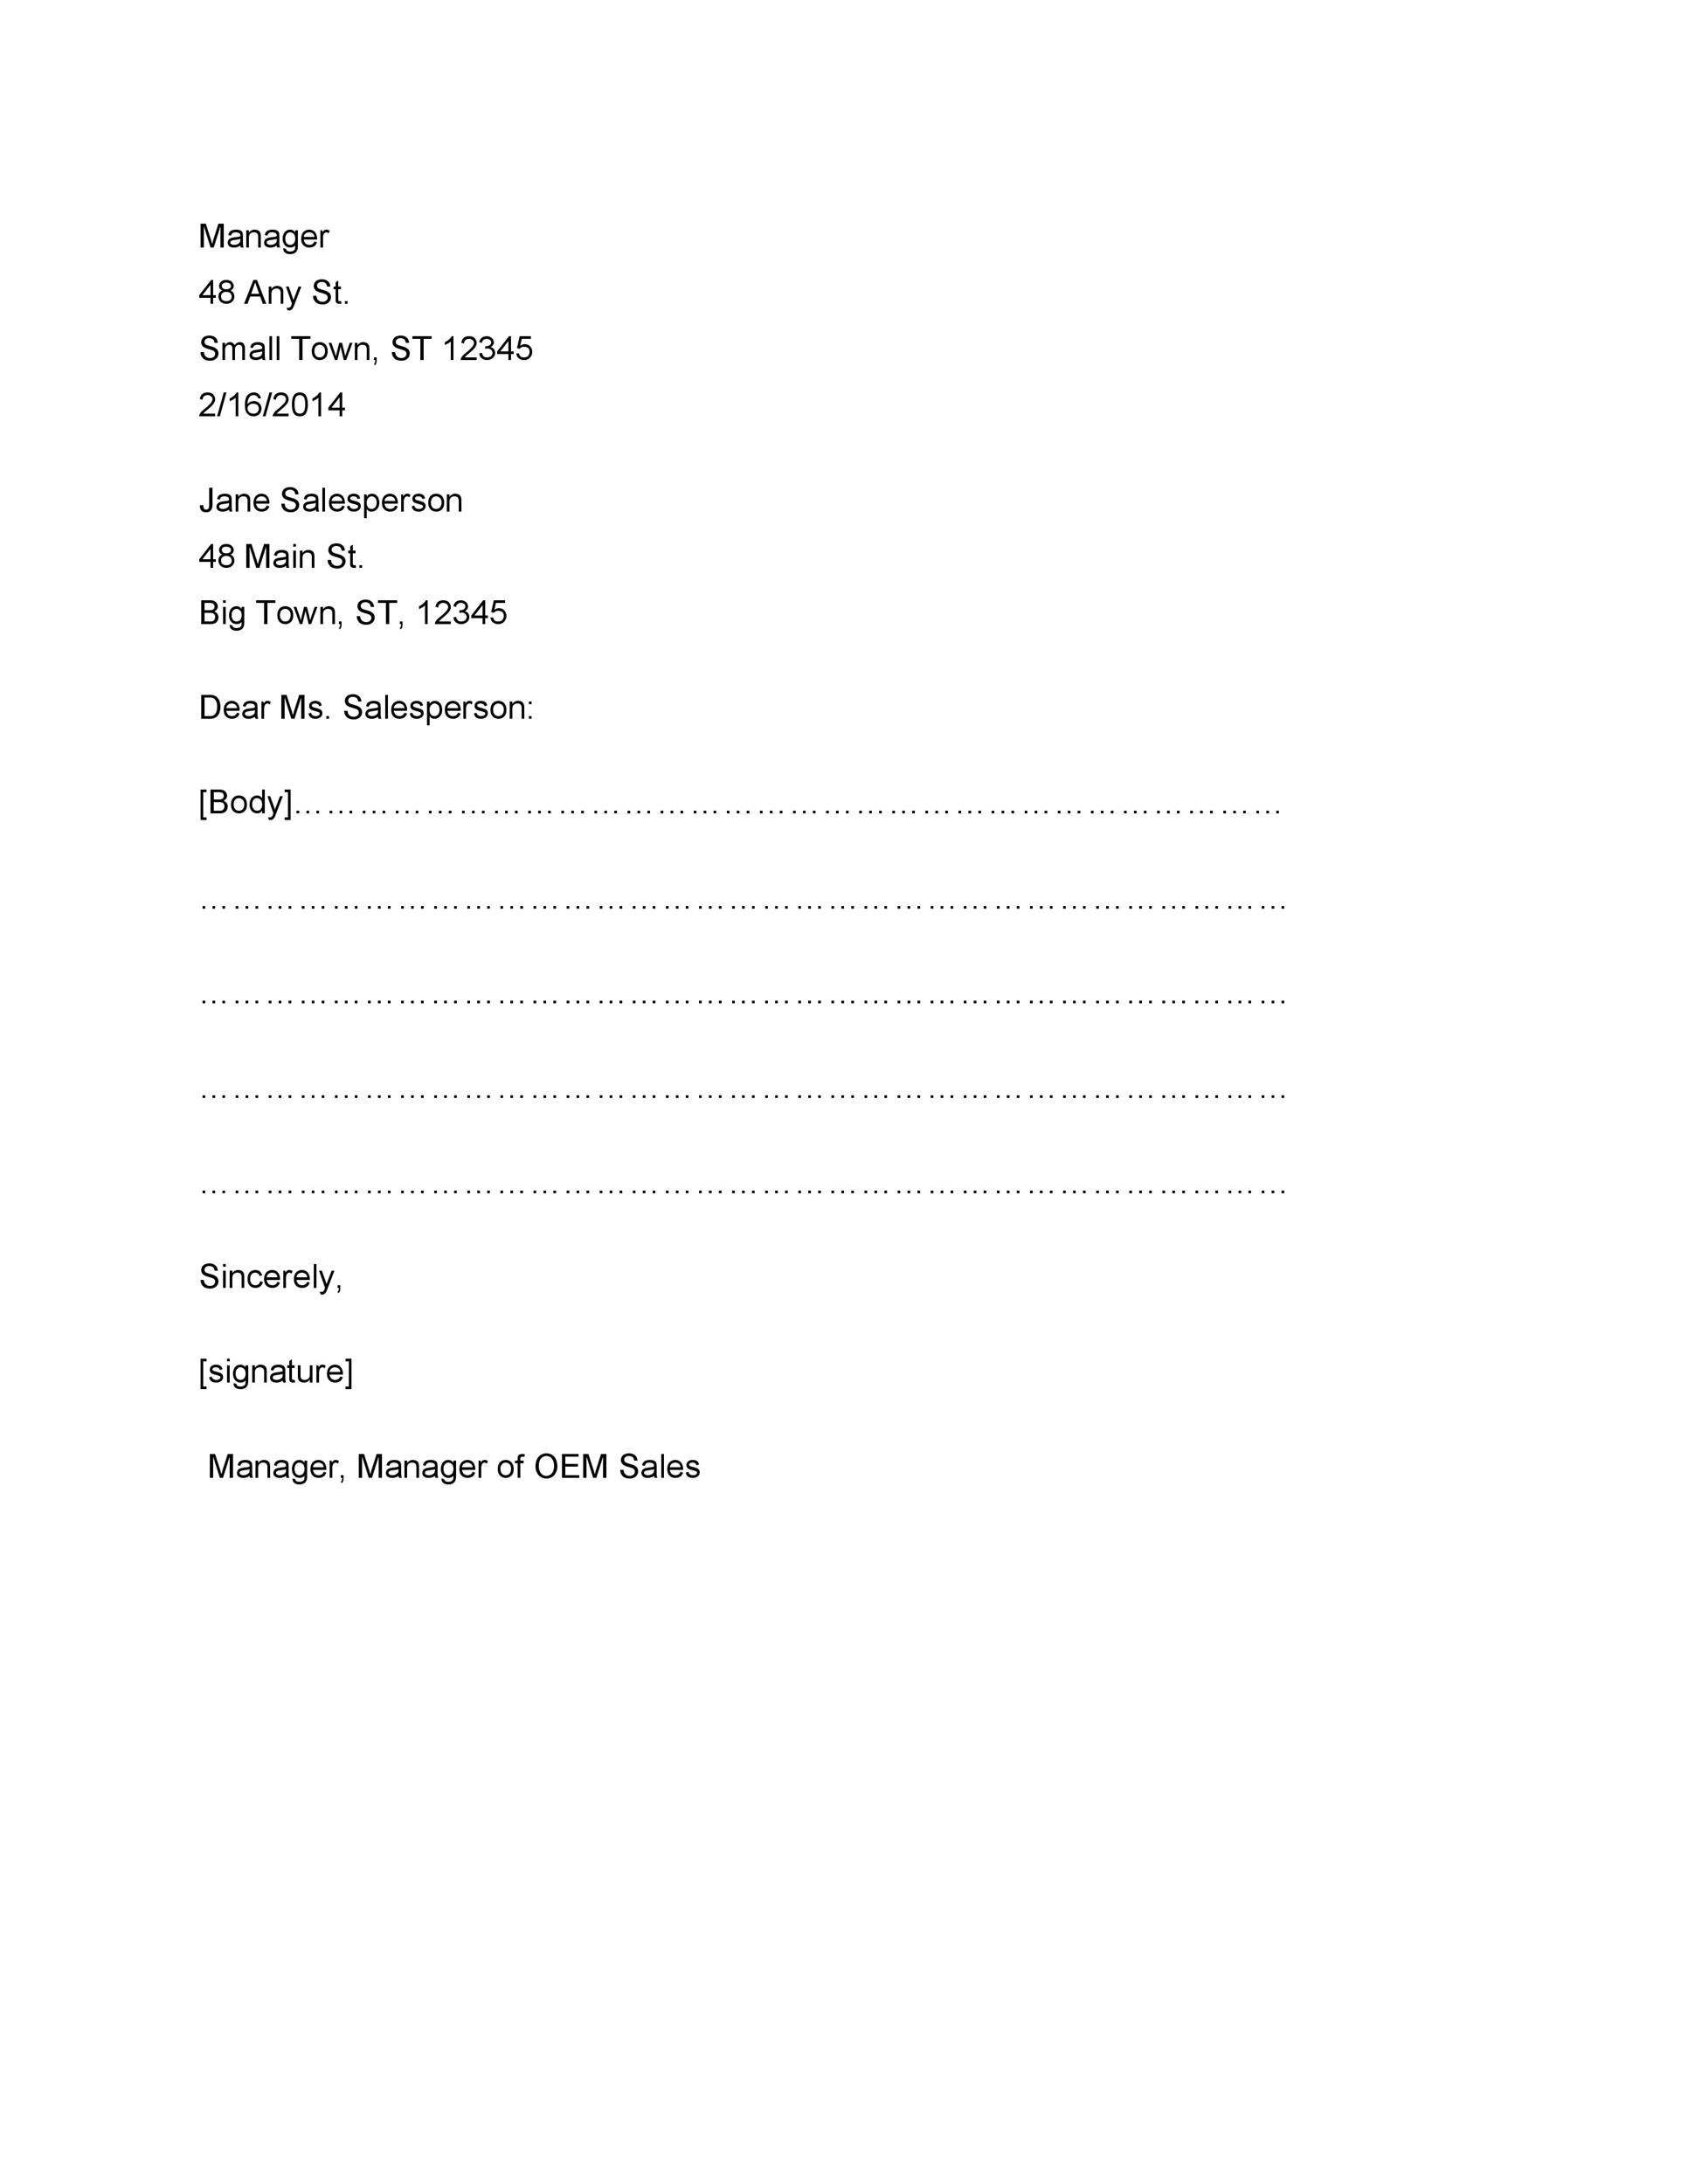 35-formal-business-letter-format-templates-examples-templatelab